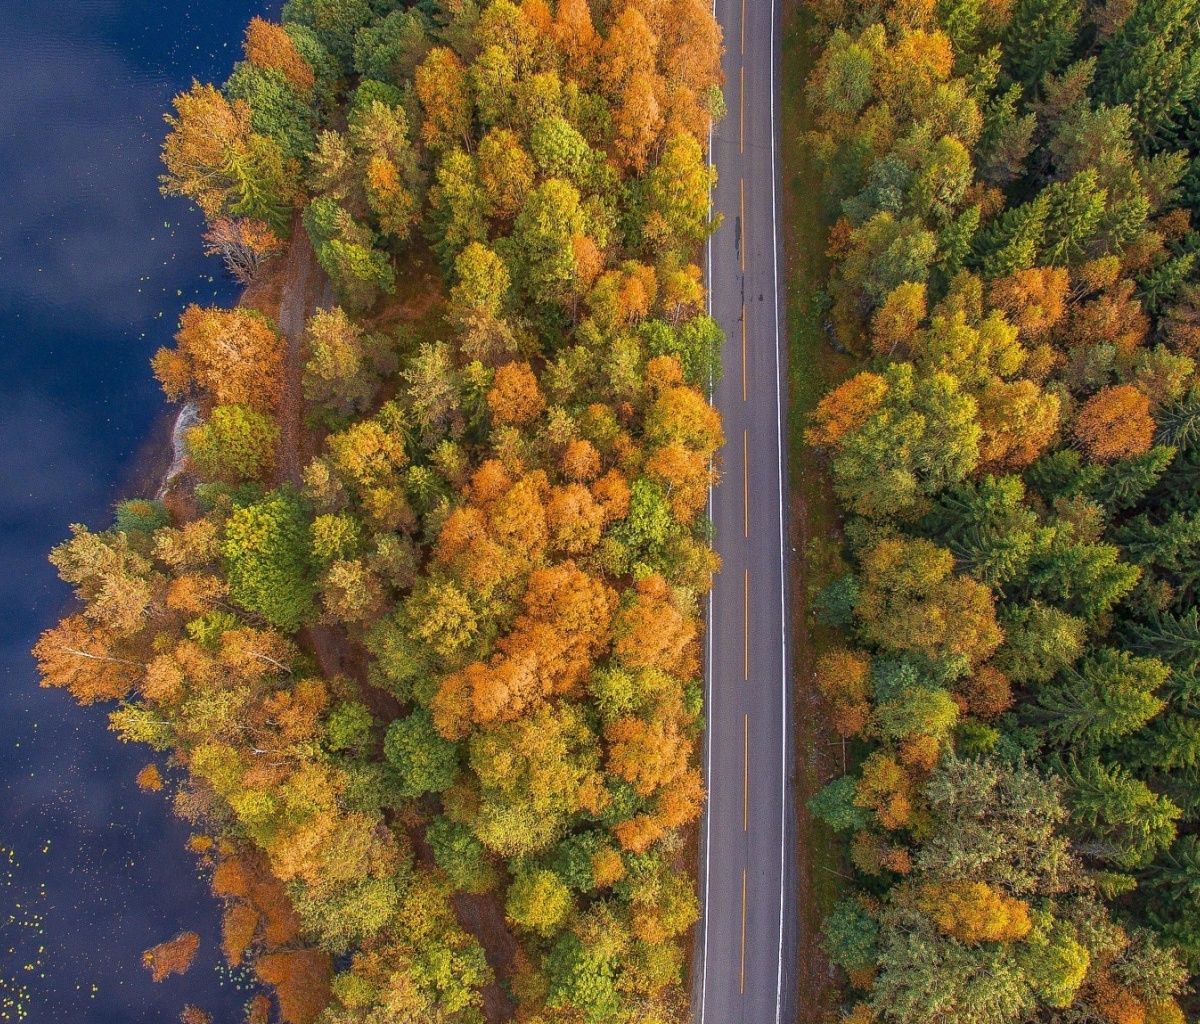 Drone photo of autumn forest screenshot #1 1200x1024